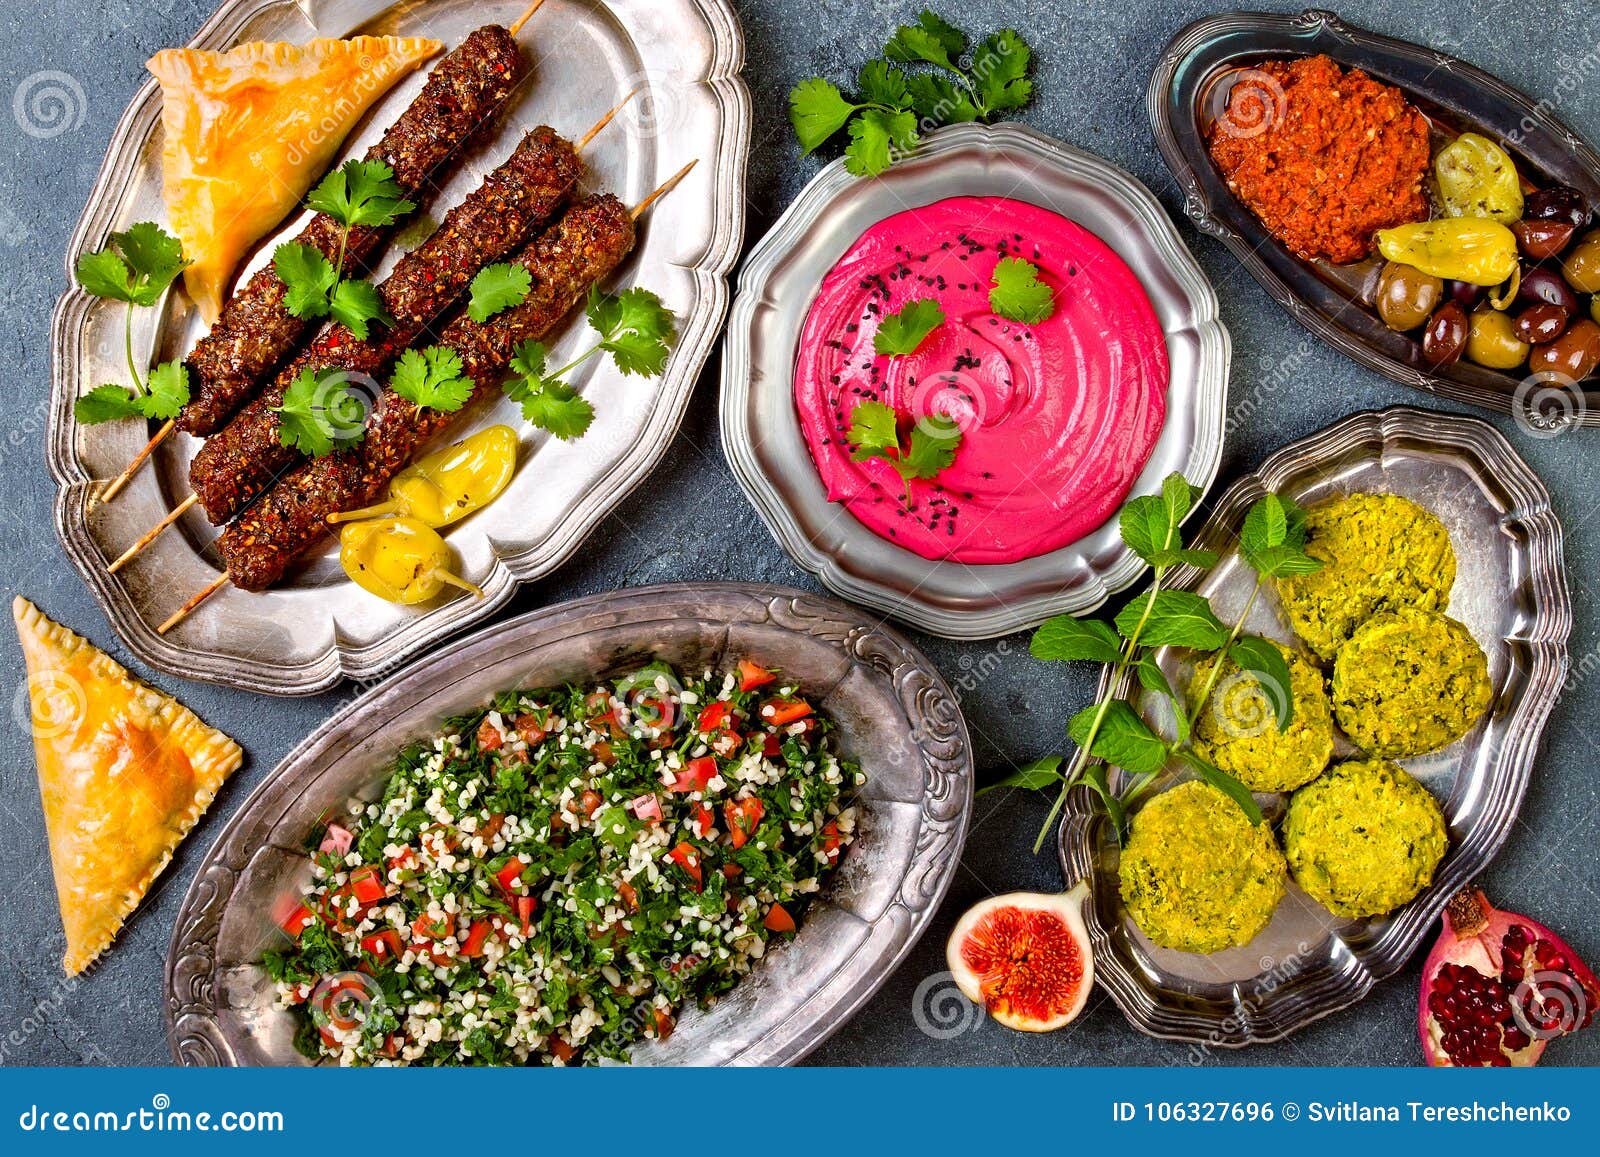 middle eastern traditional dinner. authentic arab cuisine. meze party food. top view, flat lay, overhead.